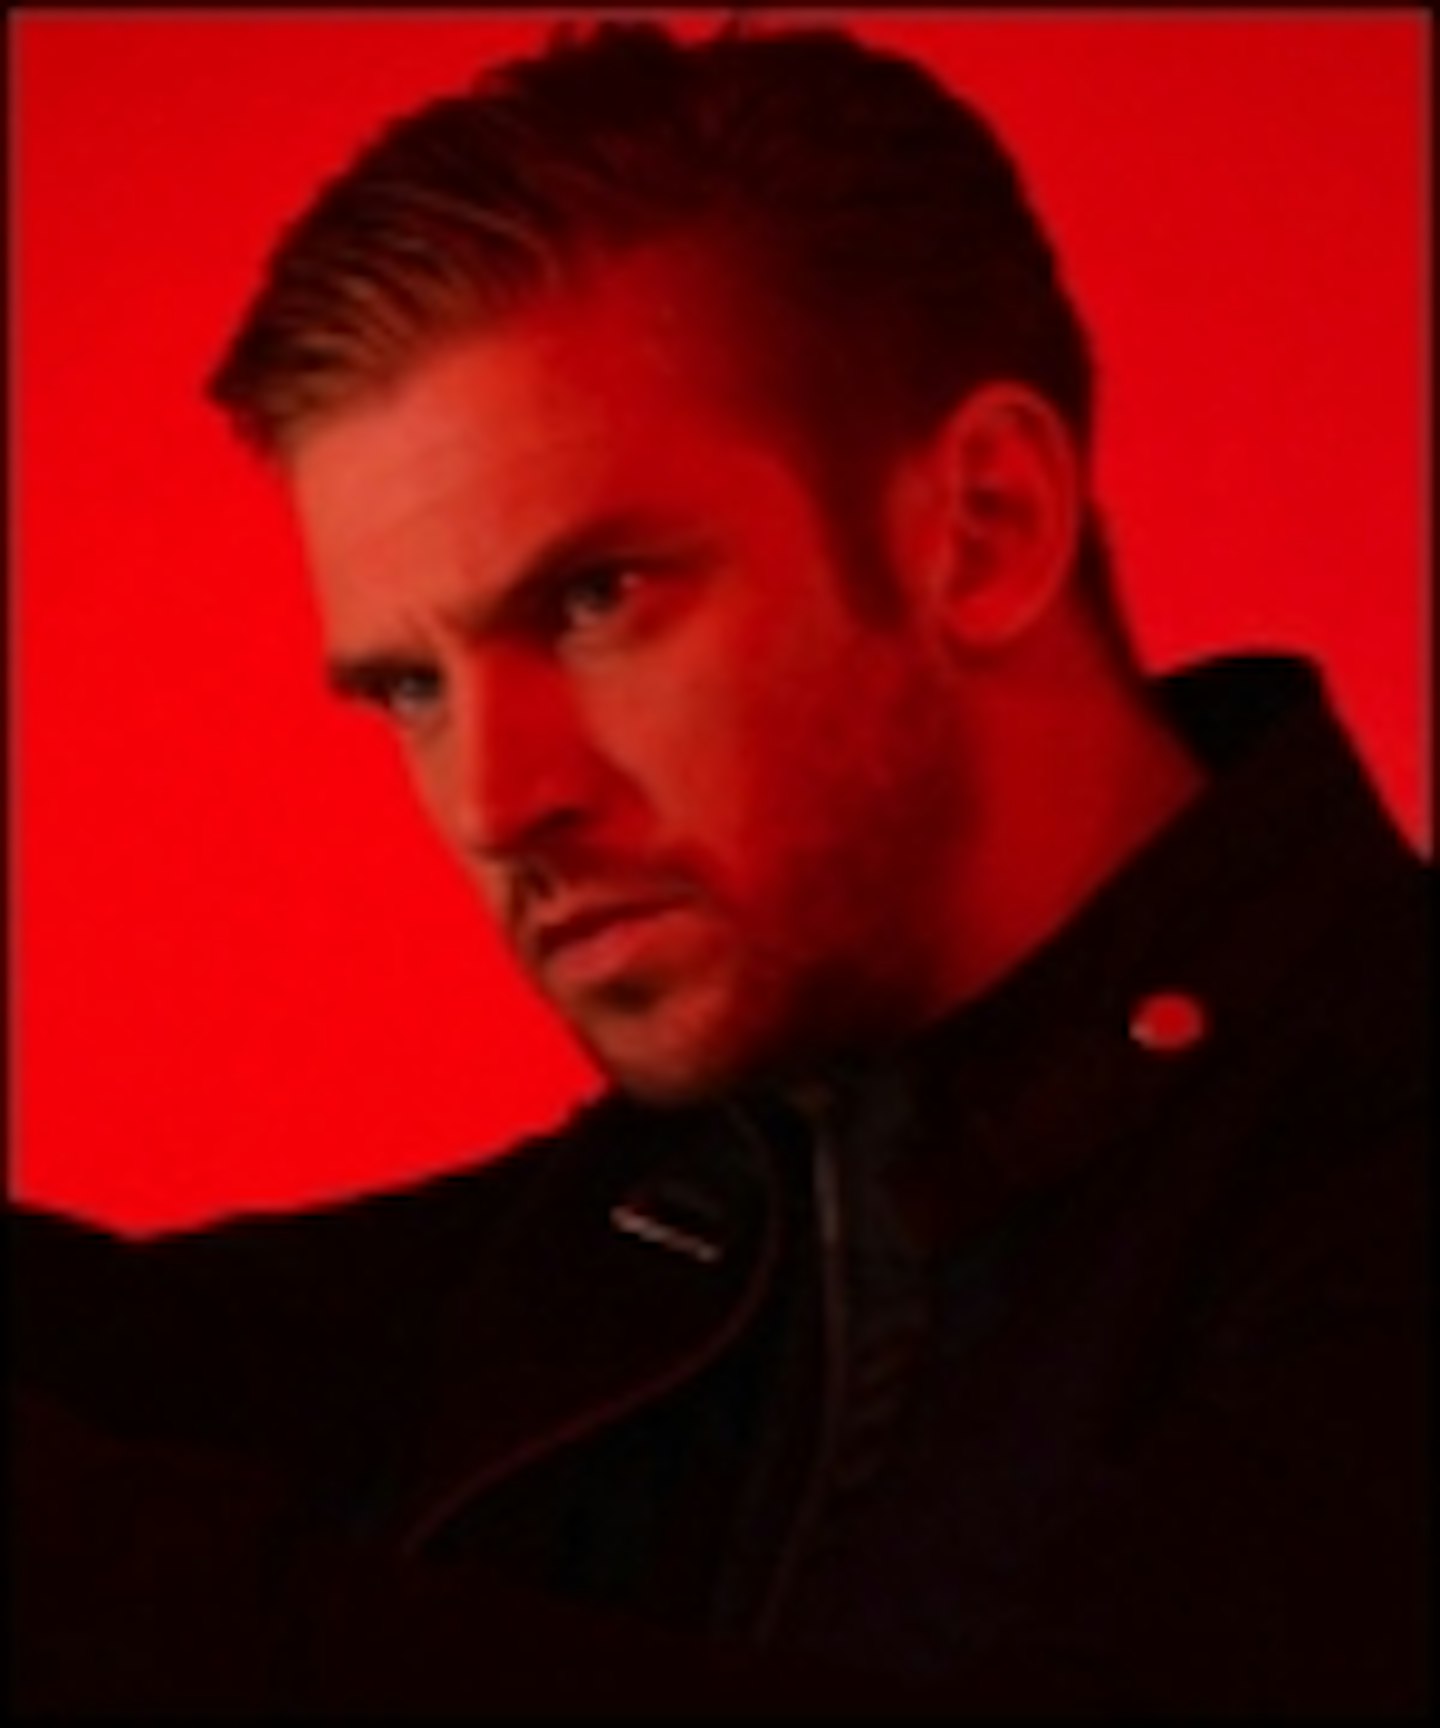 Teaser Trailer For The Guest